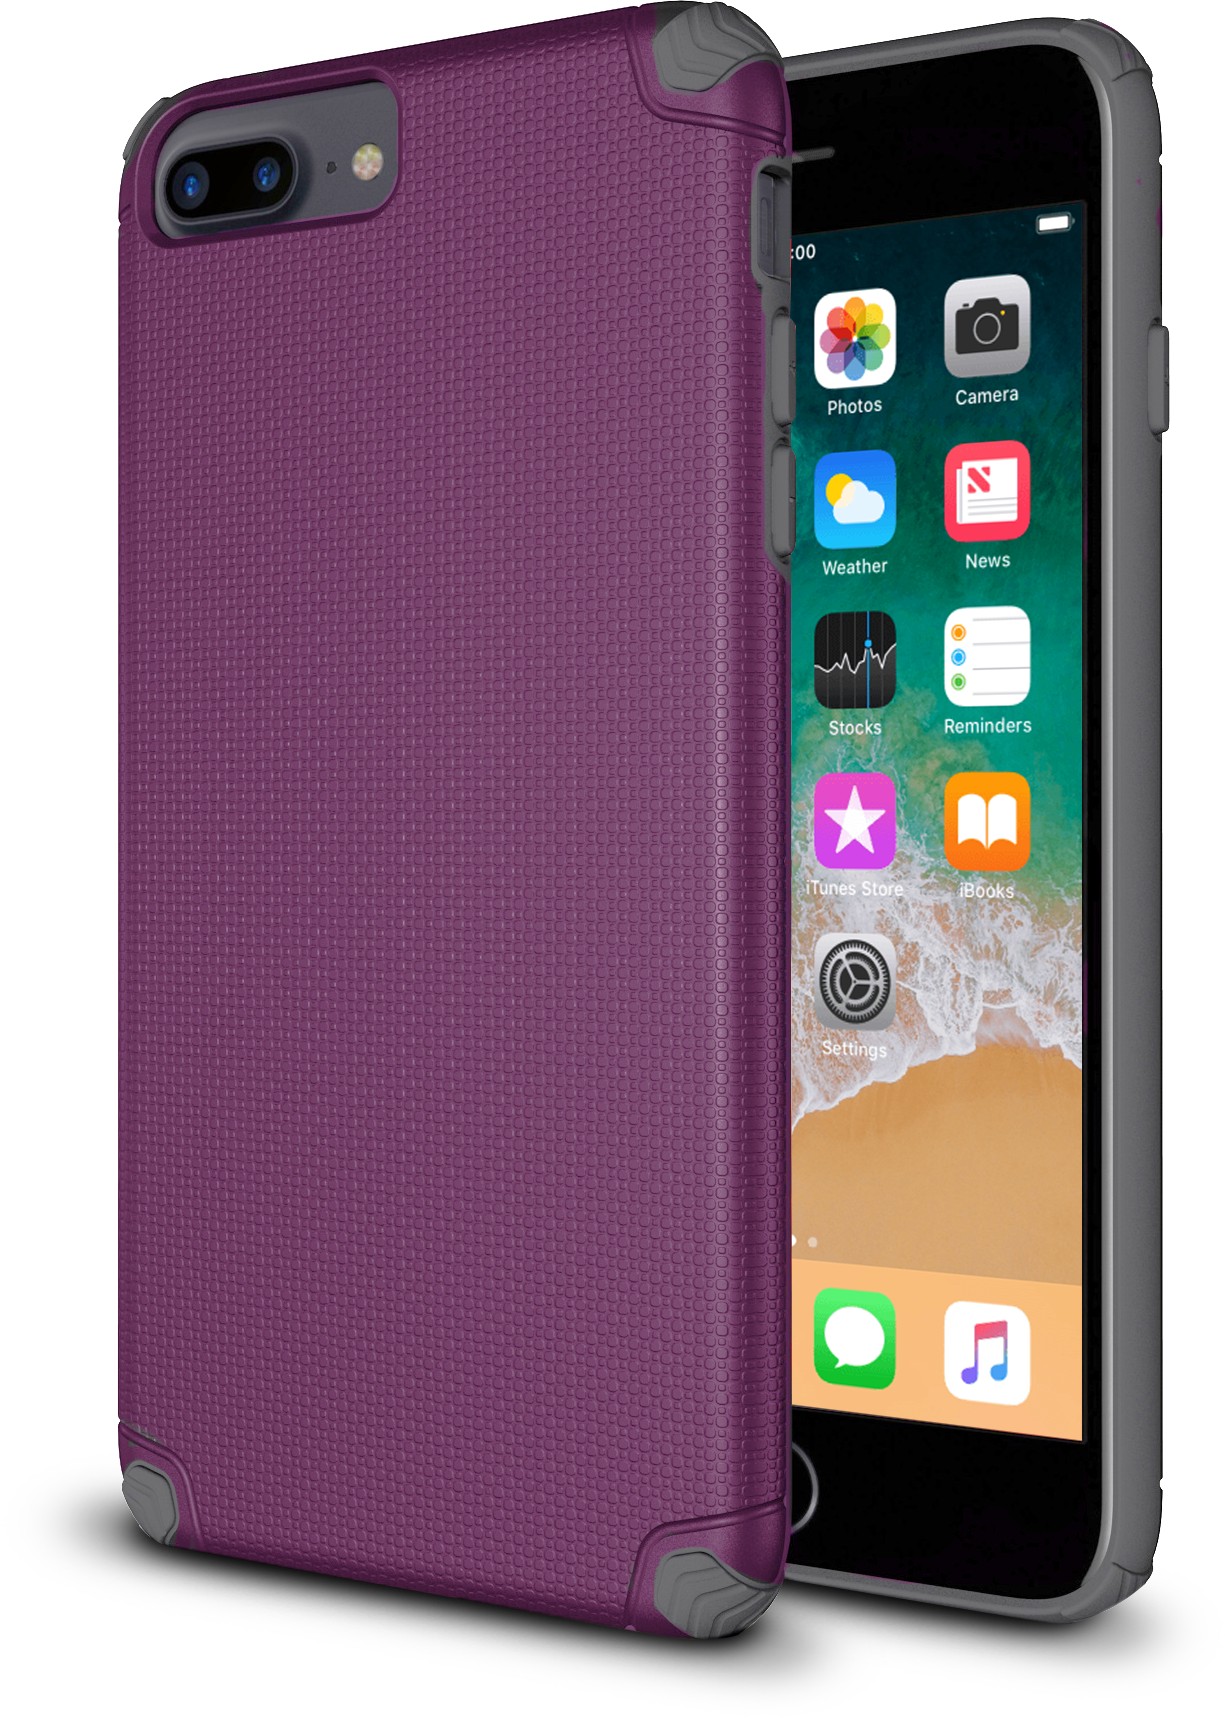 Purple rugged case protective for iPhone 7 and 8 Plus cell phones